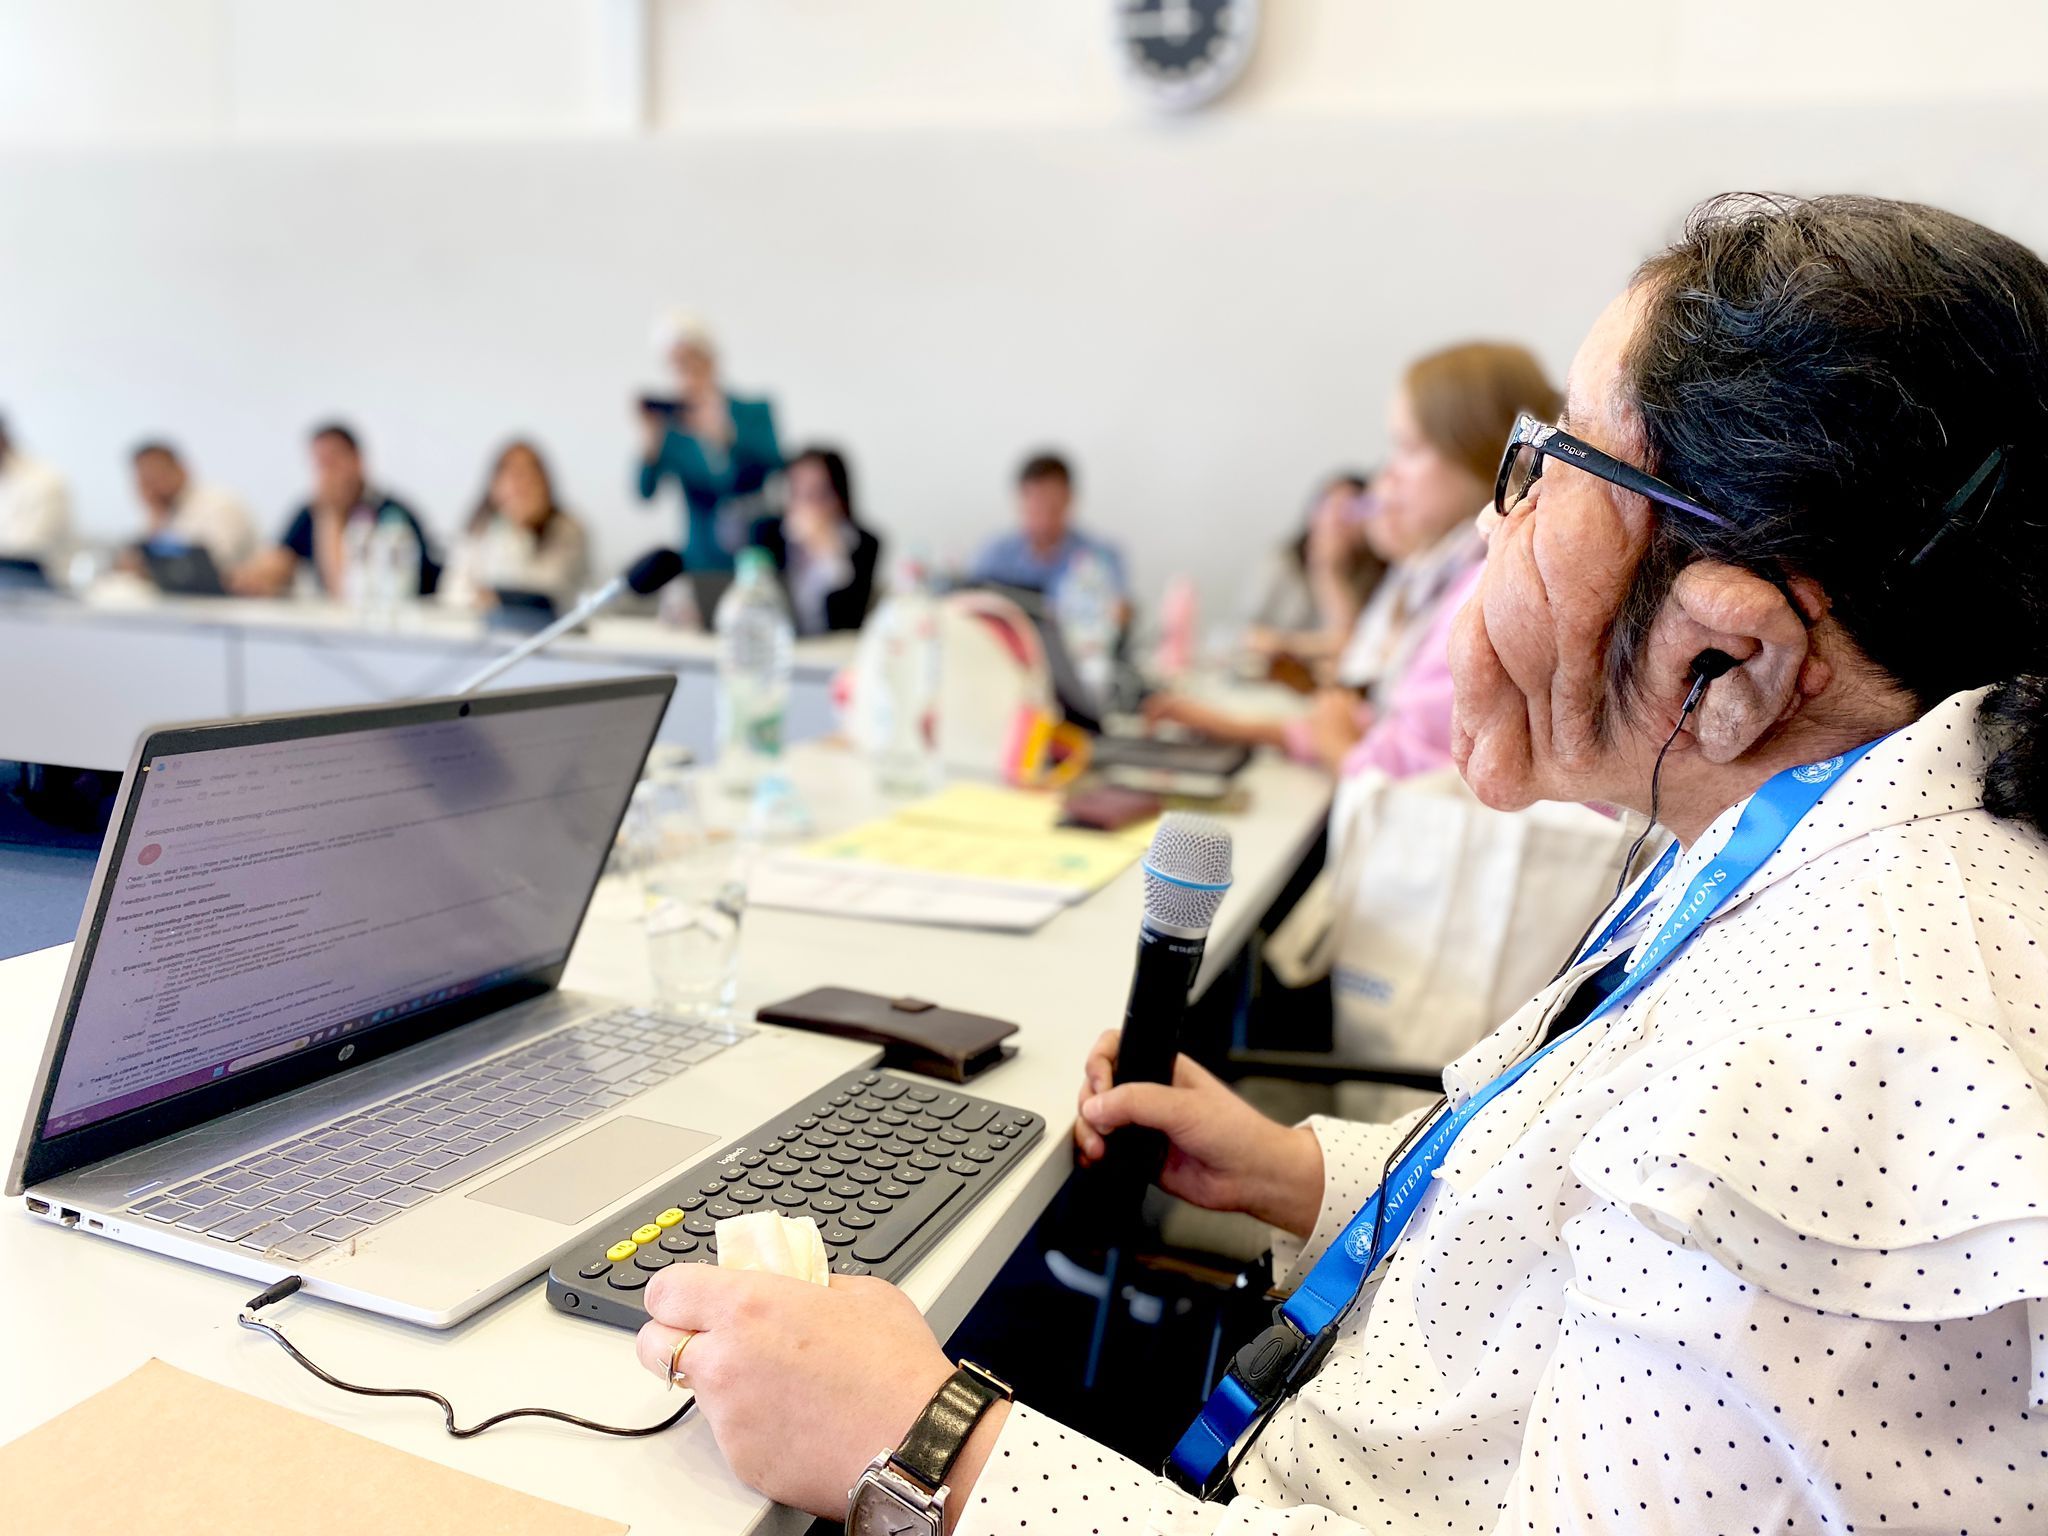 Vibhu Sharma, UN Volunteer Communications Specialist Disability Inclusion conducts a session on Communicating with Persons with Disabilities at the Global Communications Workshop at the UNV Headquarters in Bonn in September 2023. @ UNV